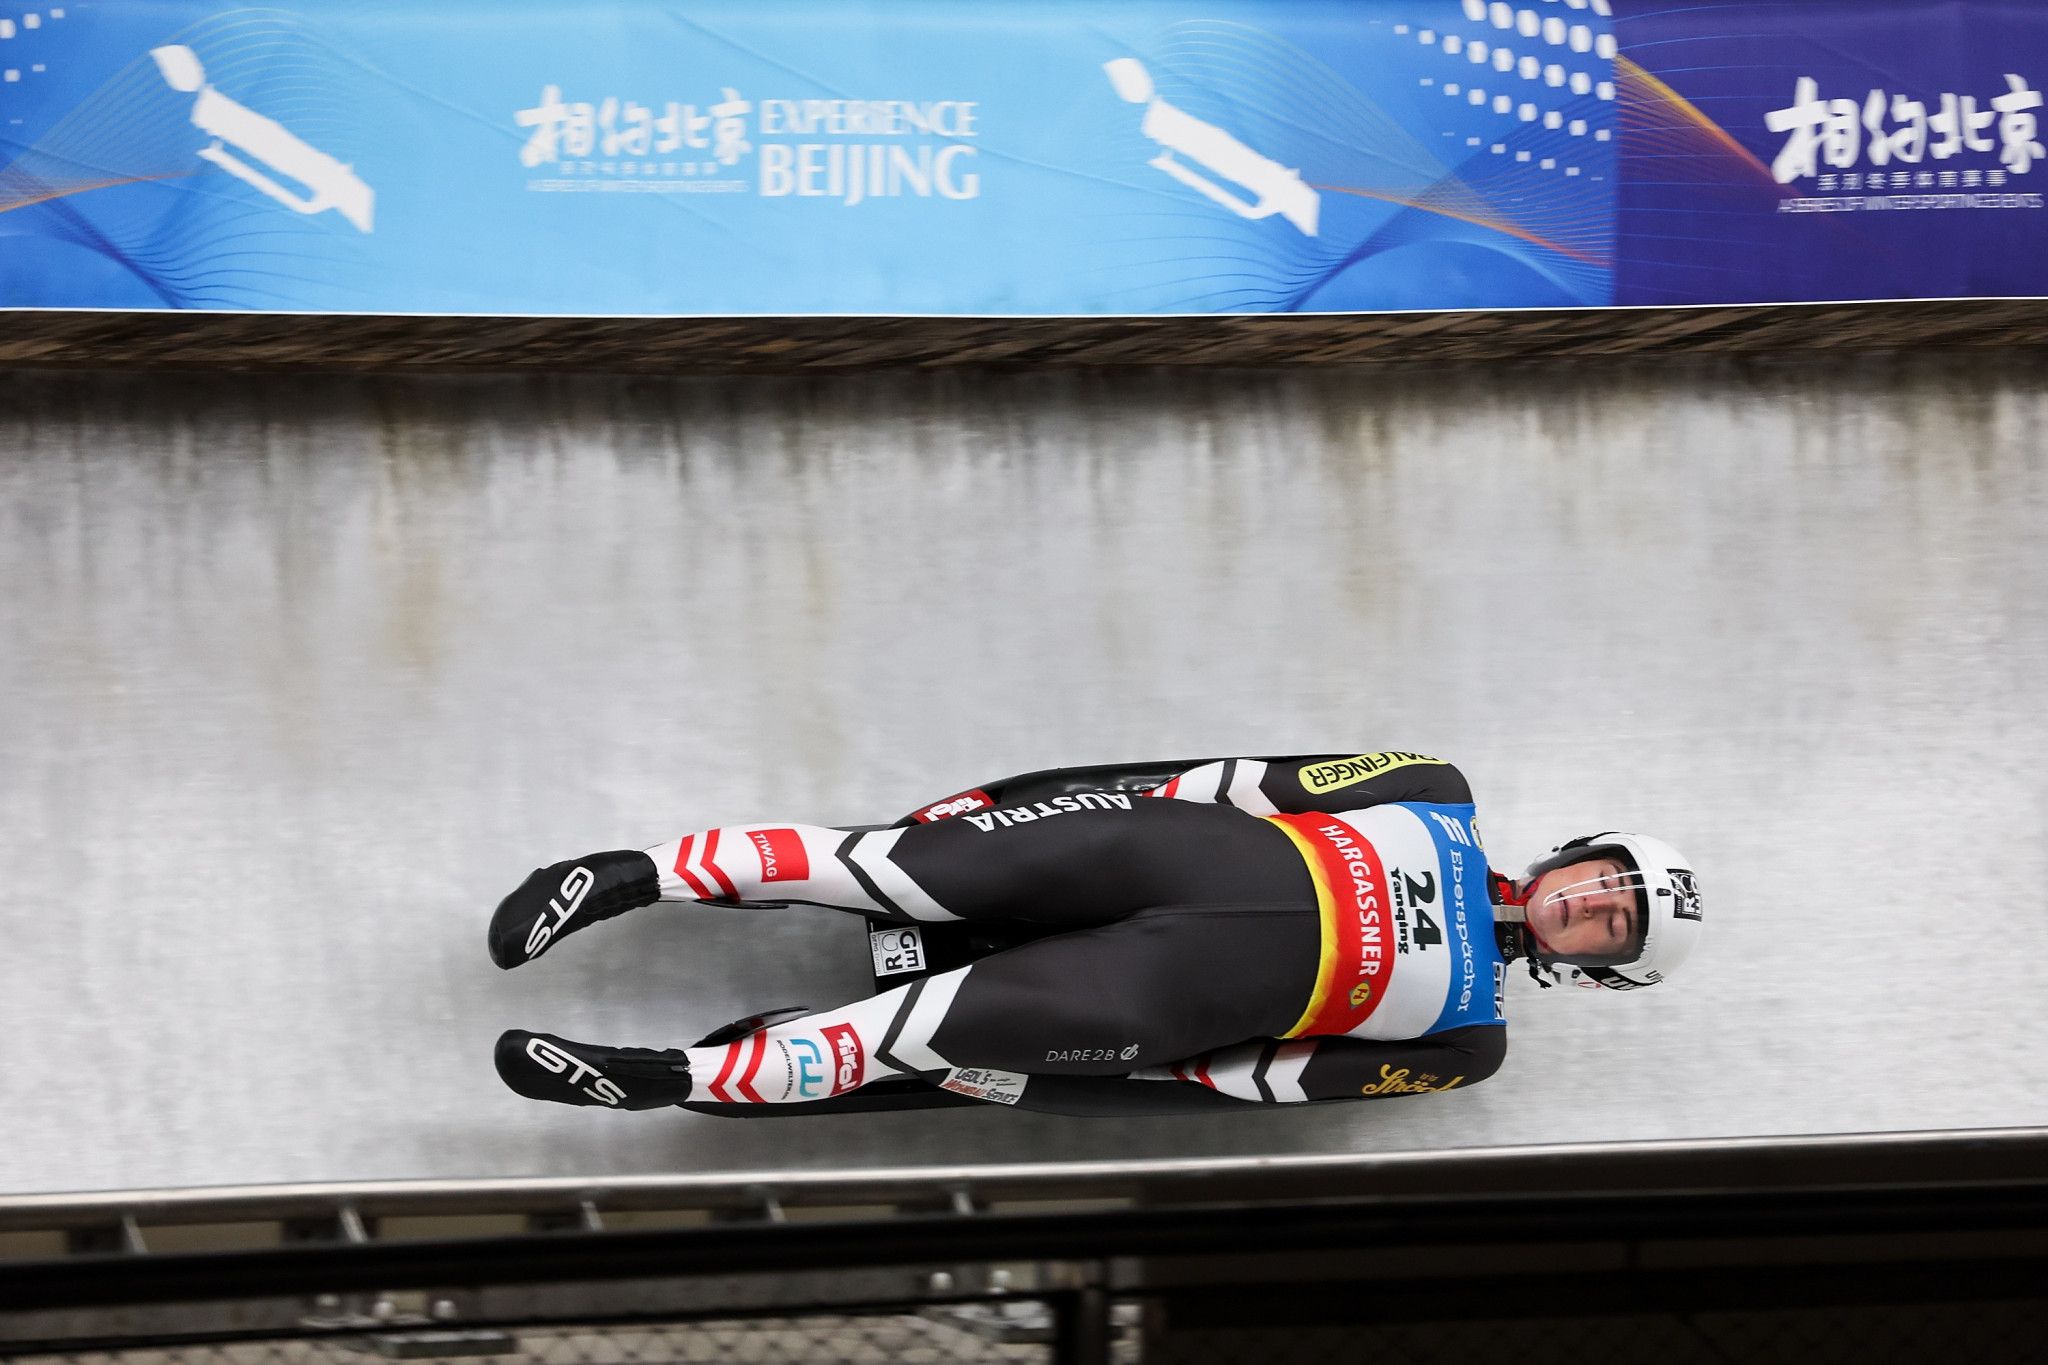 Egle starts Luge World Cup season with victory on Beijing 2022 track